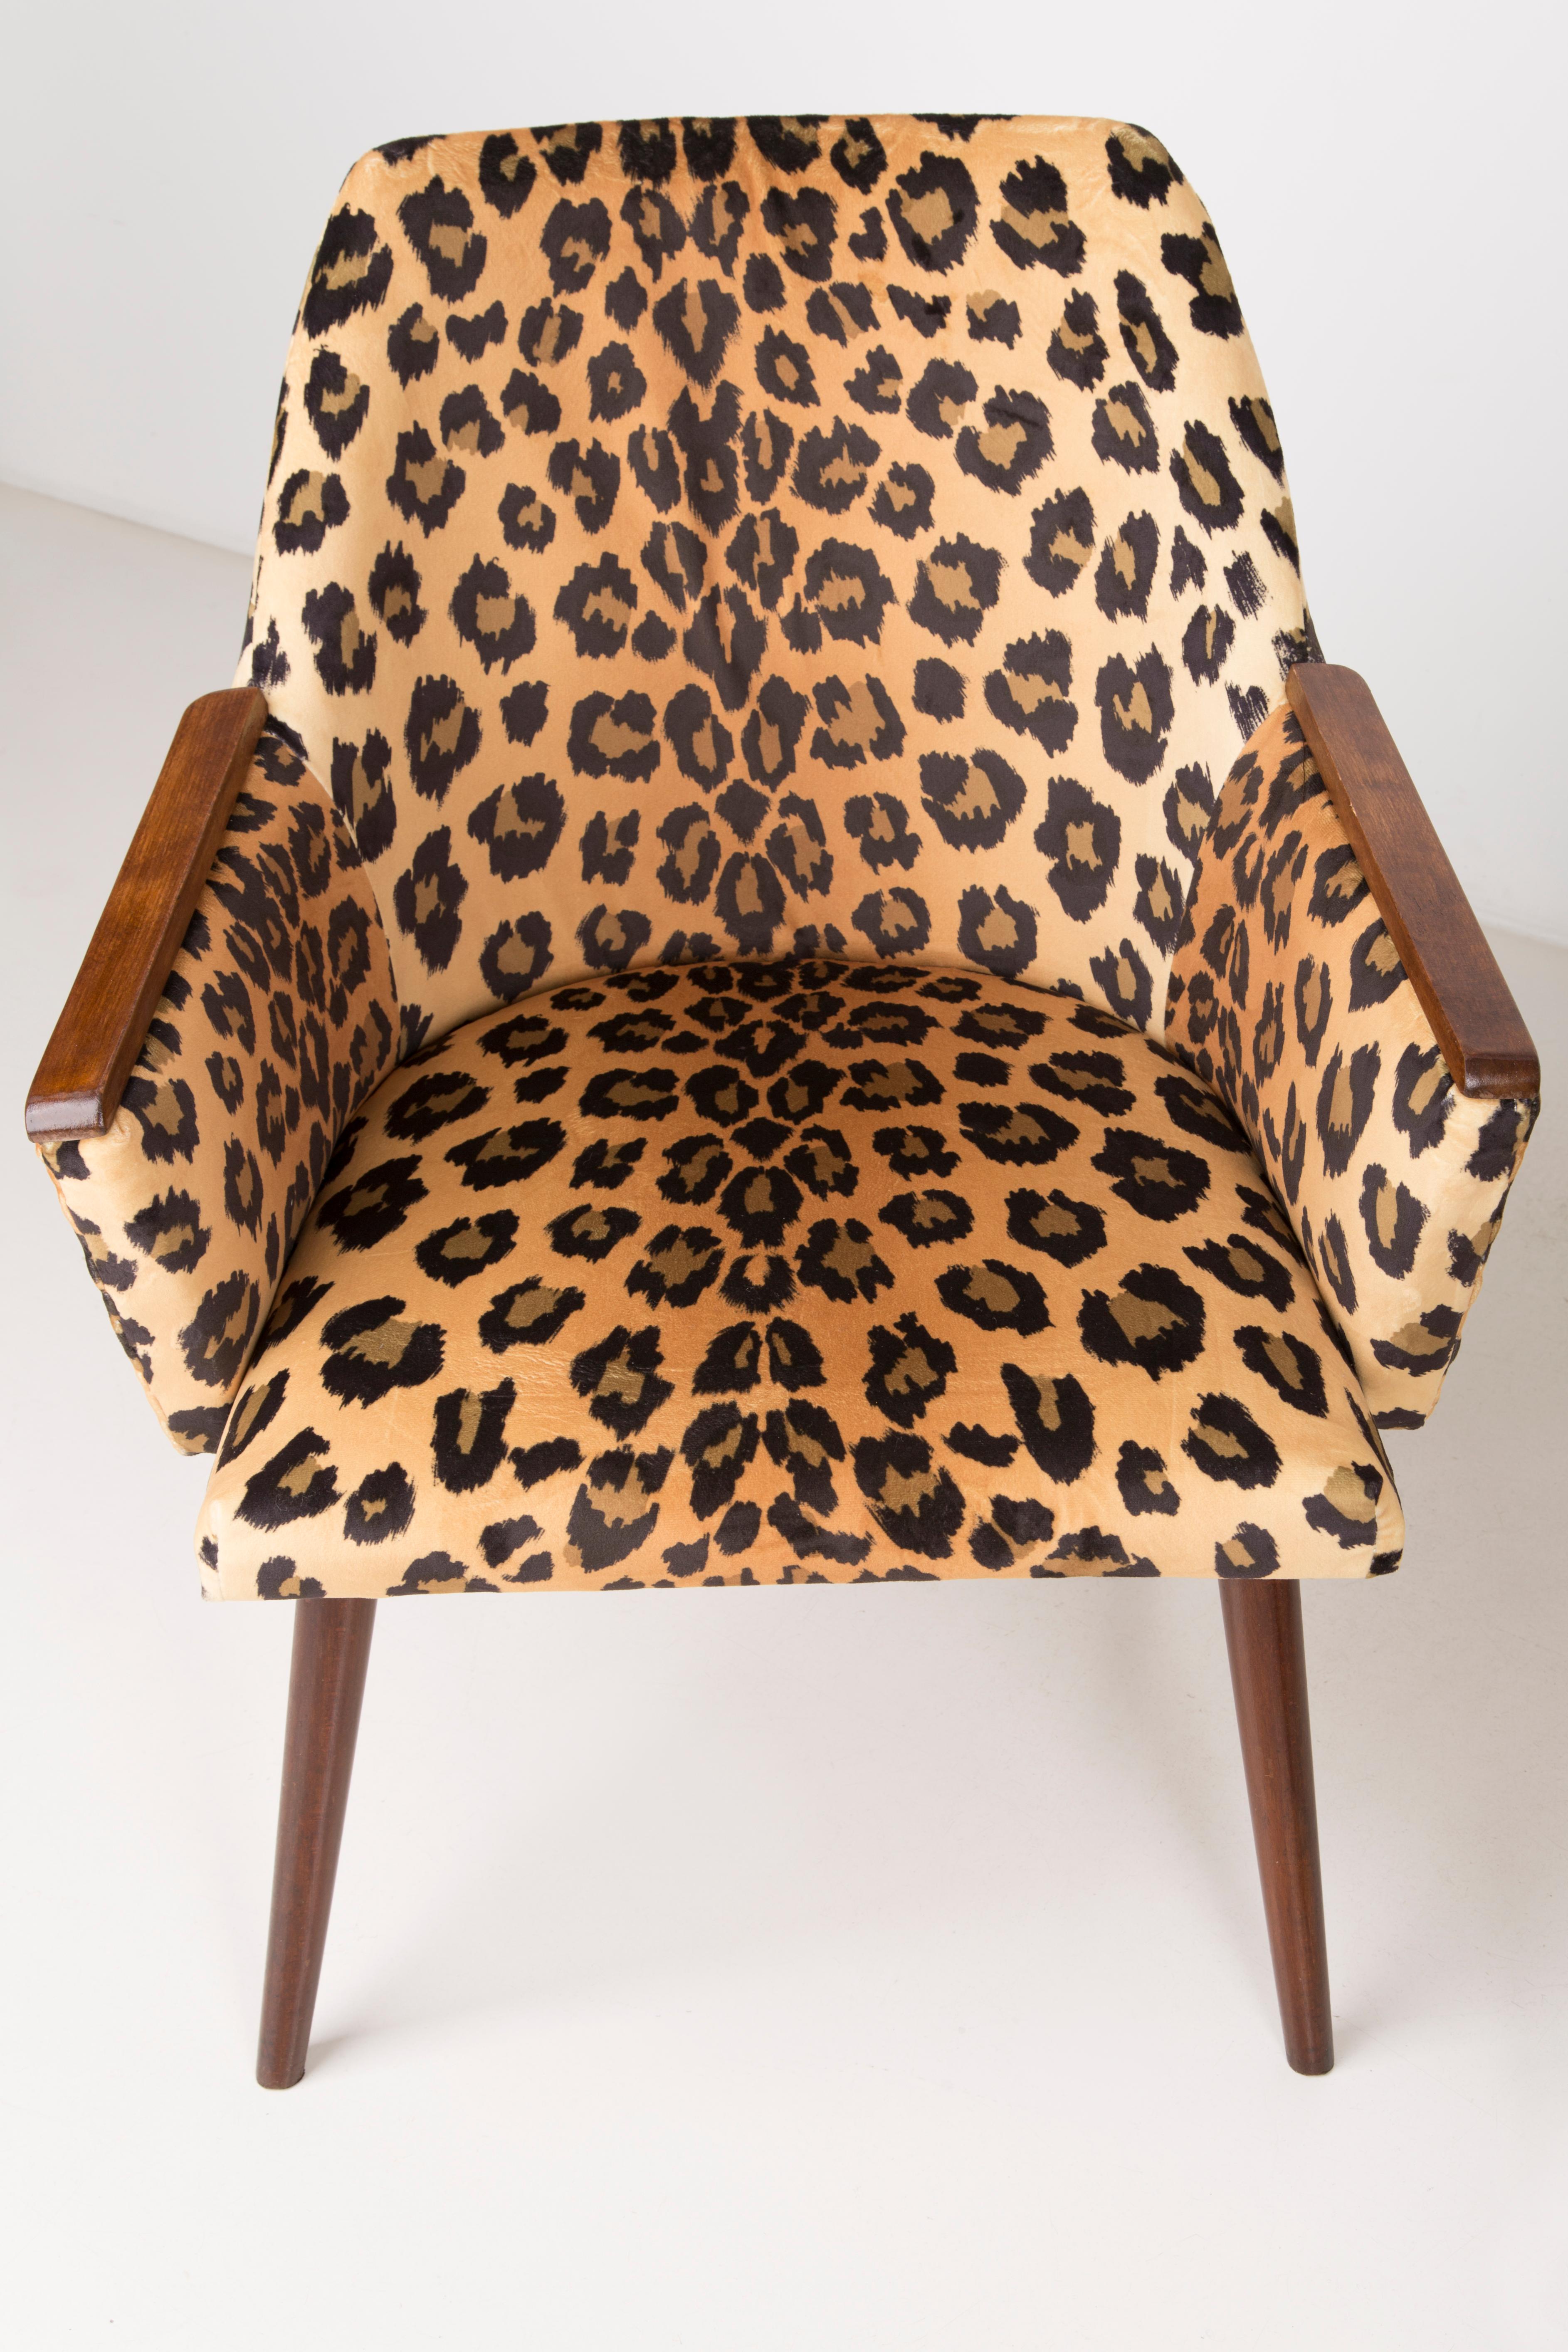 Set of Two Mid-Century Modern Leopard Print Chairs, 1960s, Germany 2